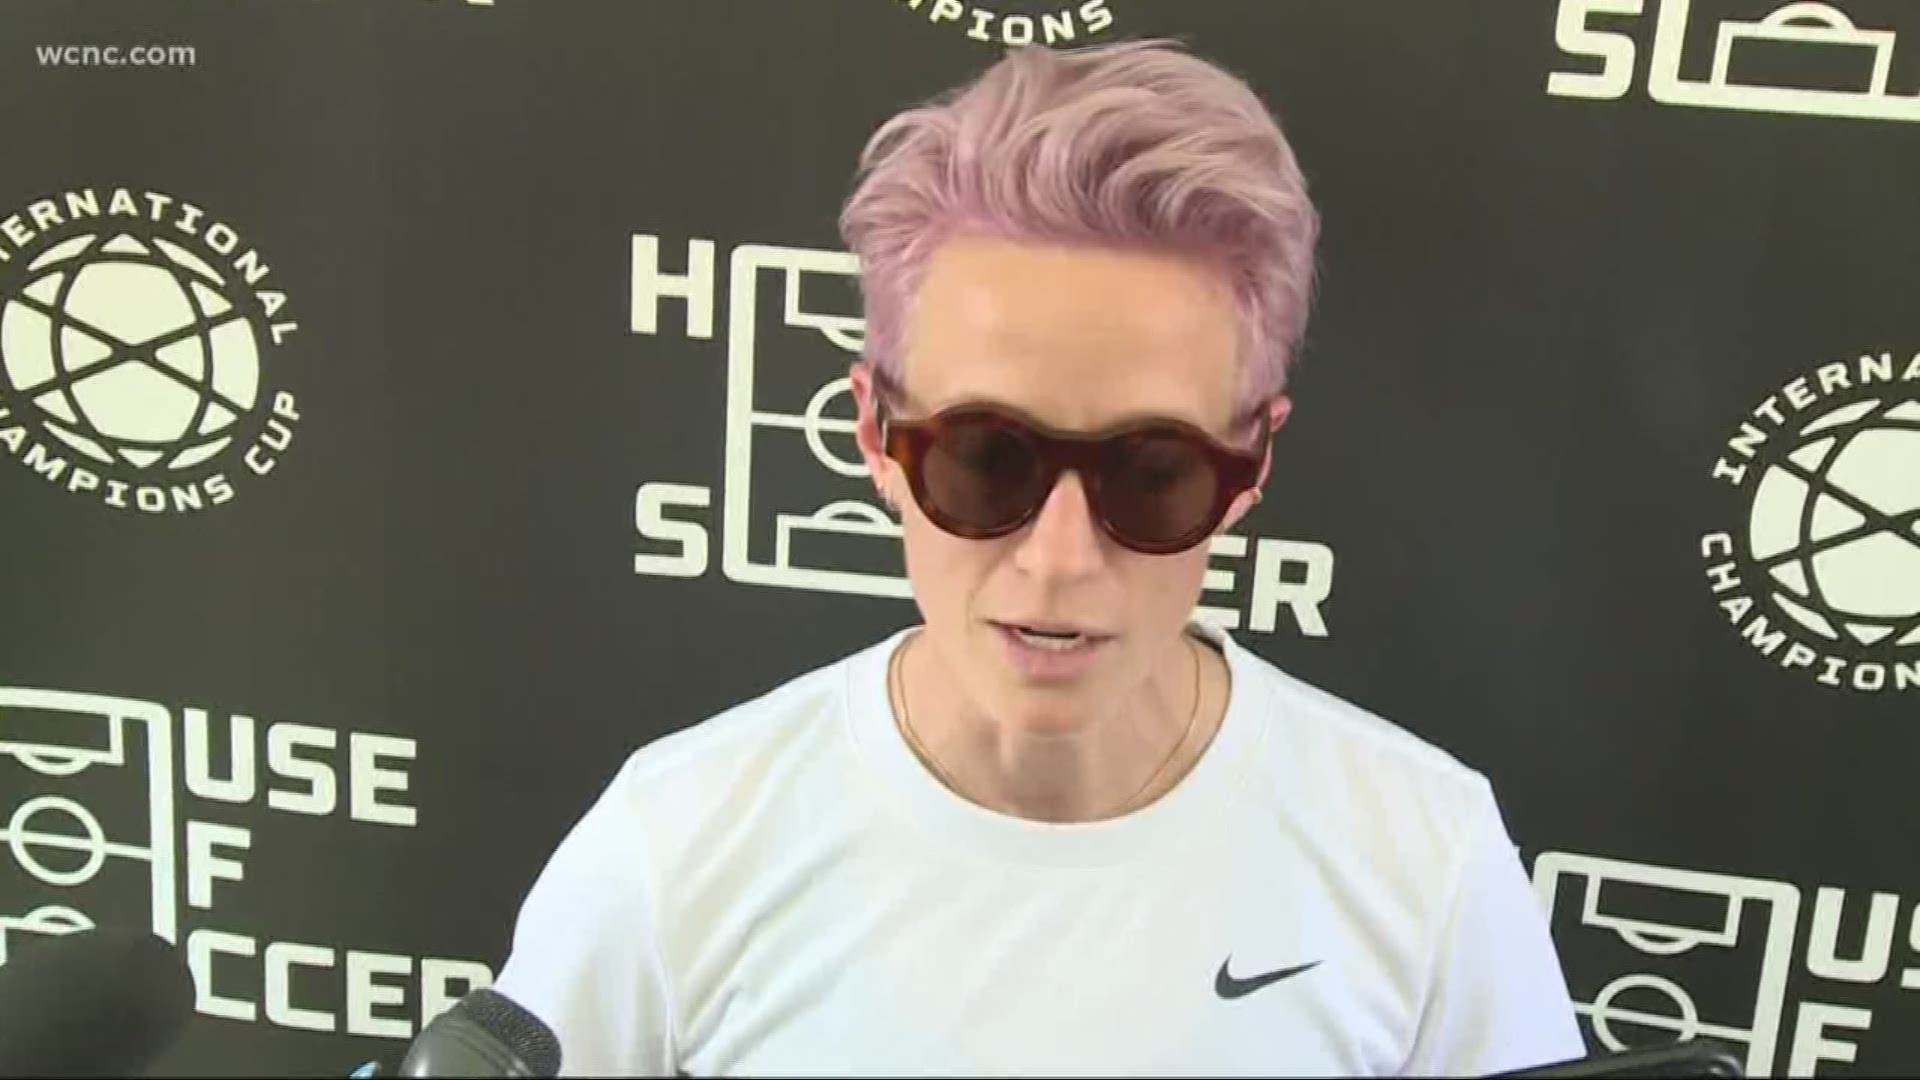 Rapinoe was in Charlotte for House of Soccer and the International Champions Cup match.